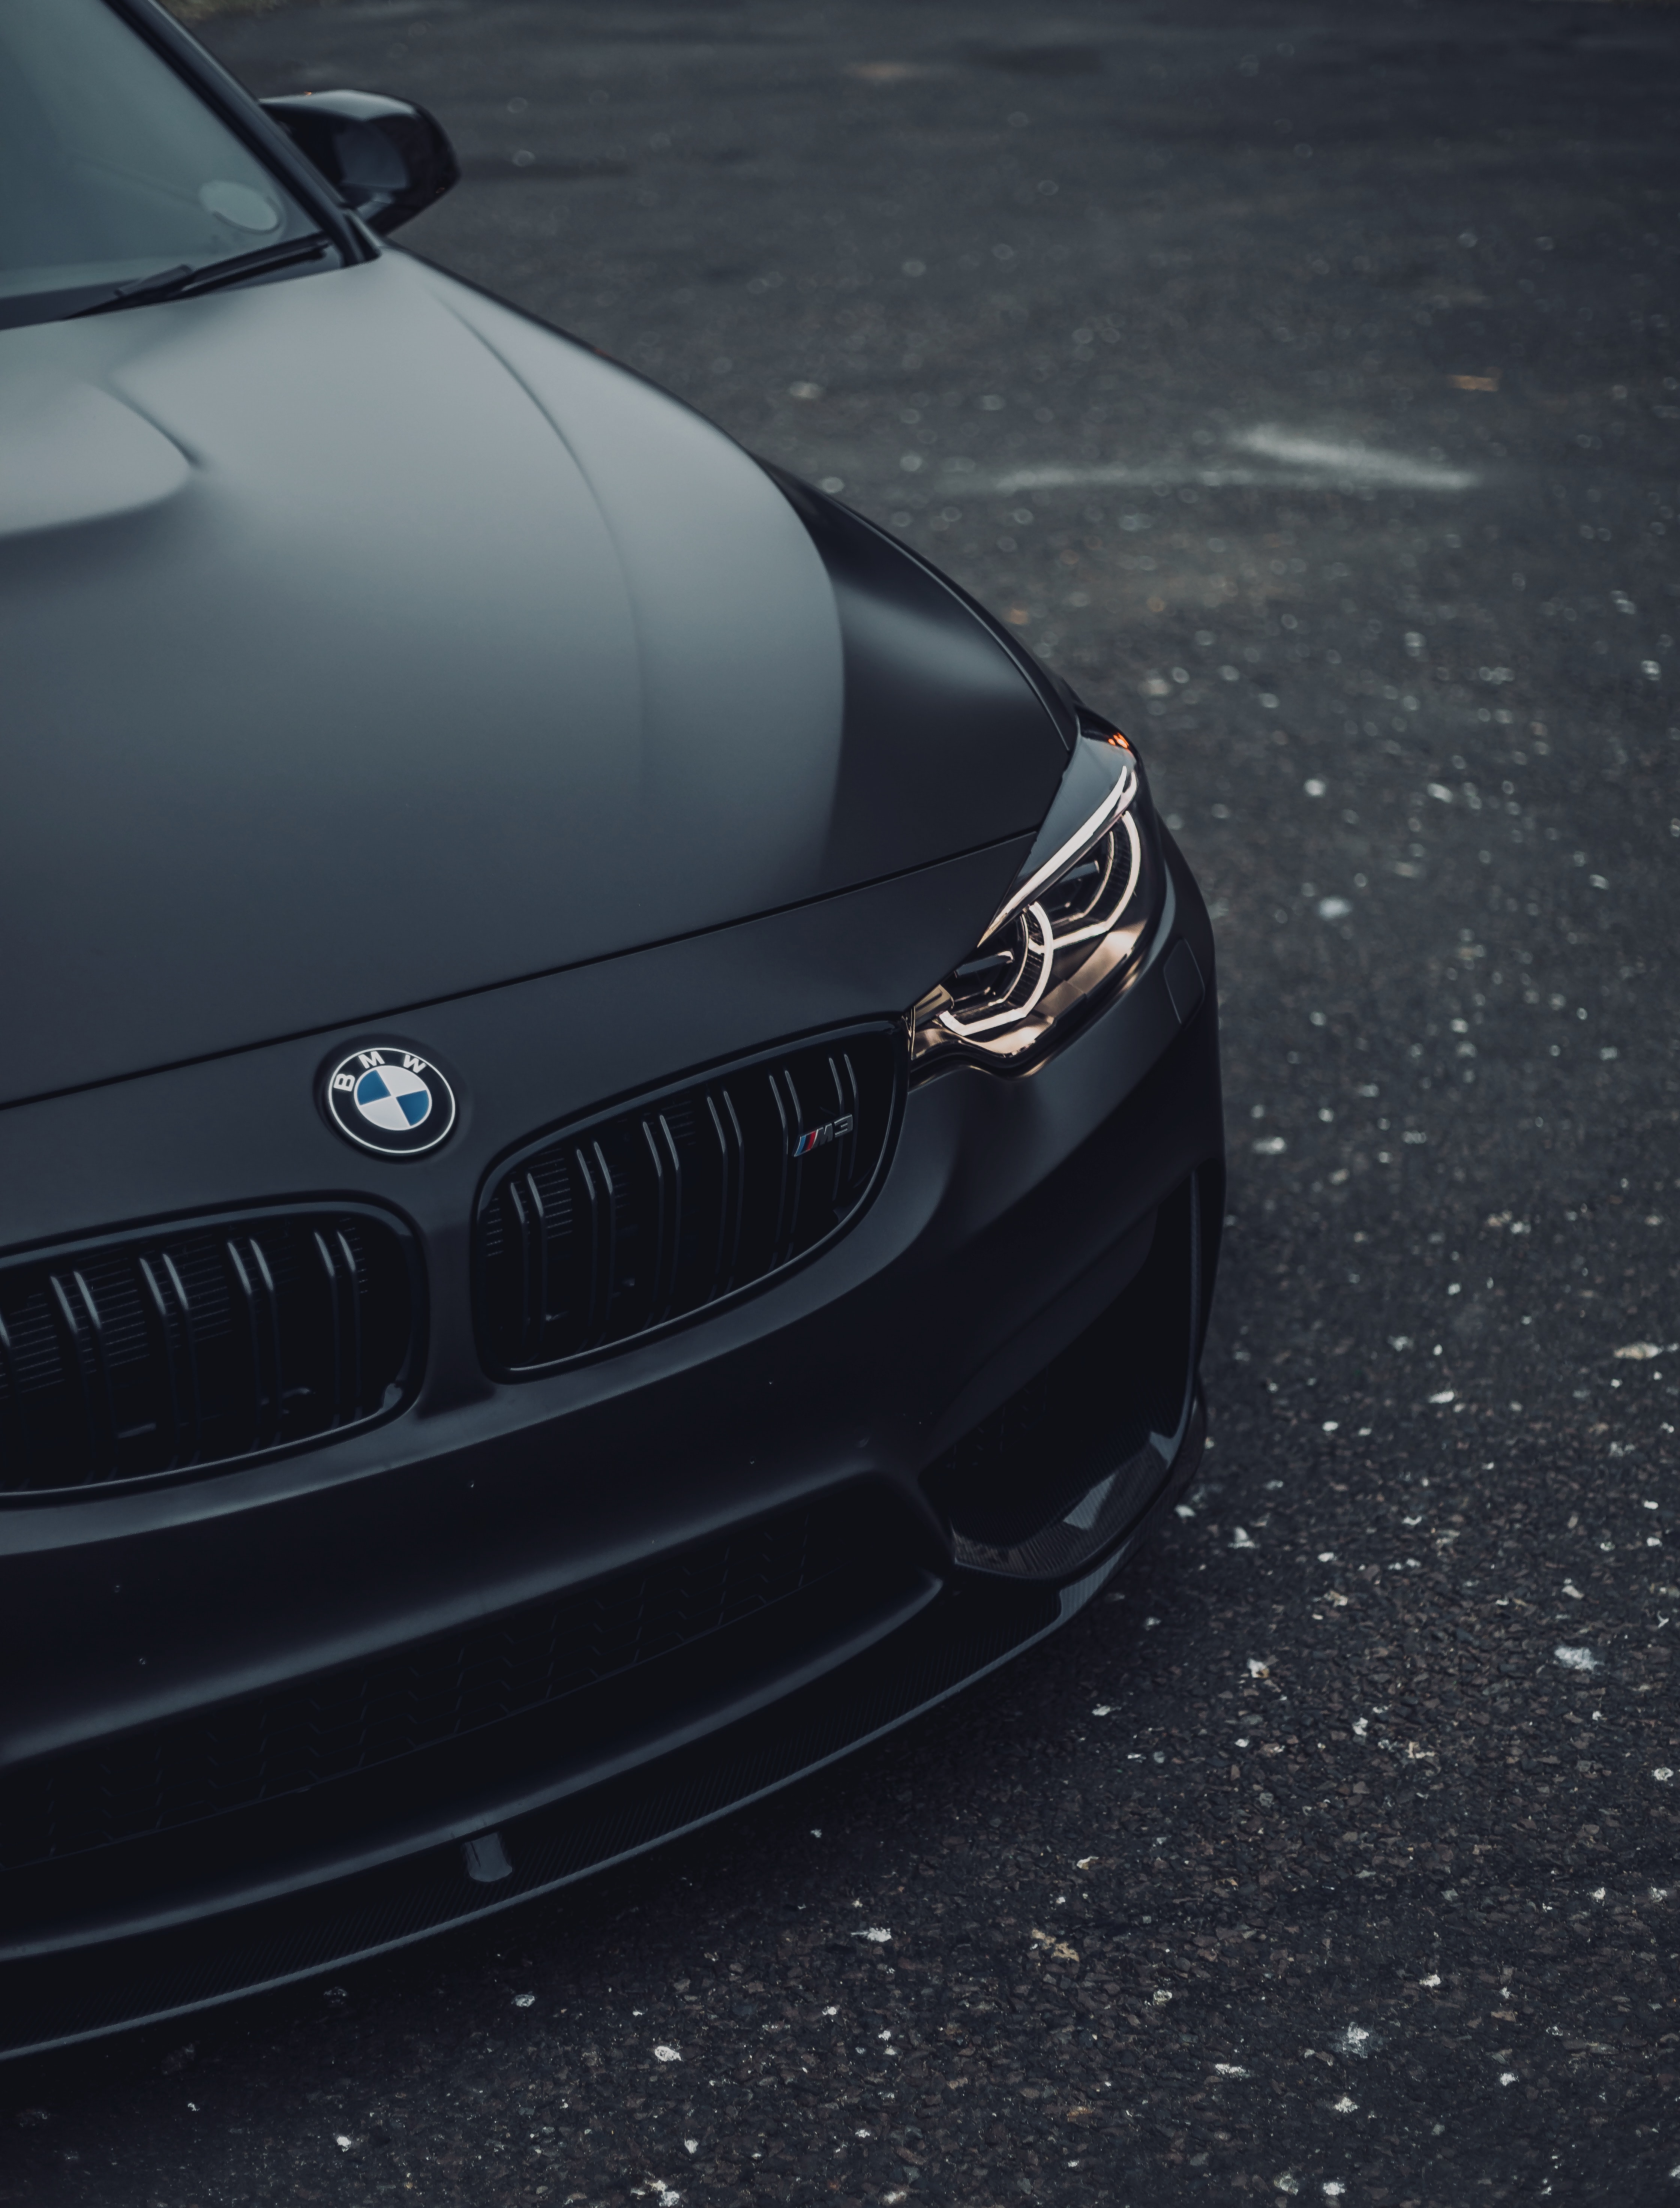 Best Bmw phone Wallpapers